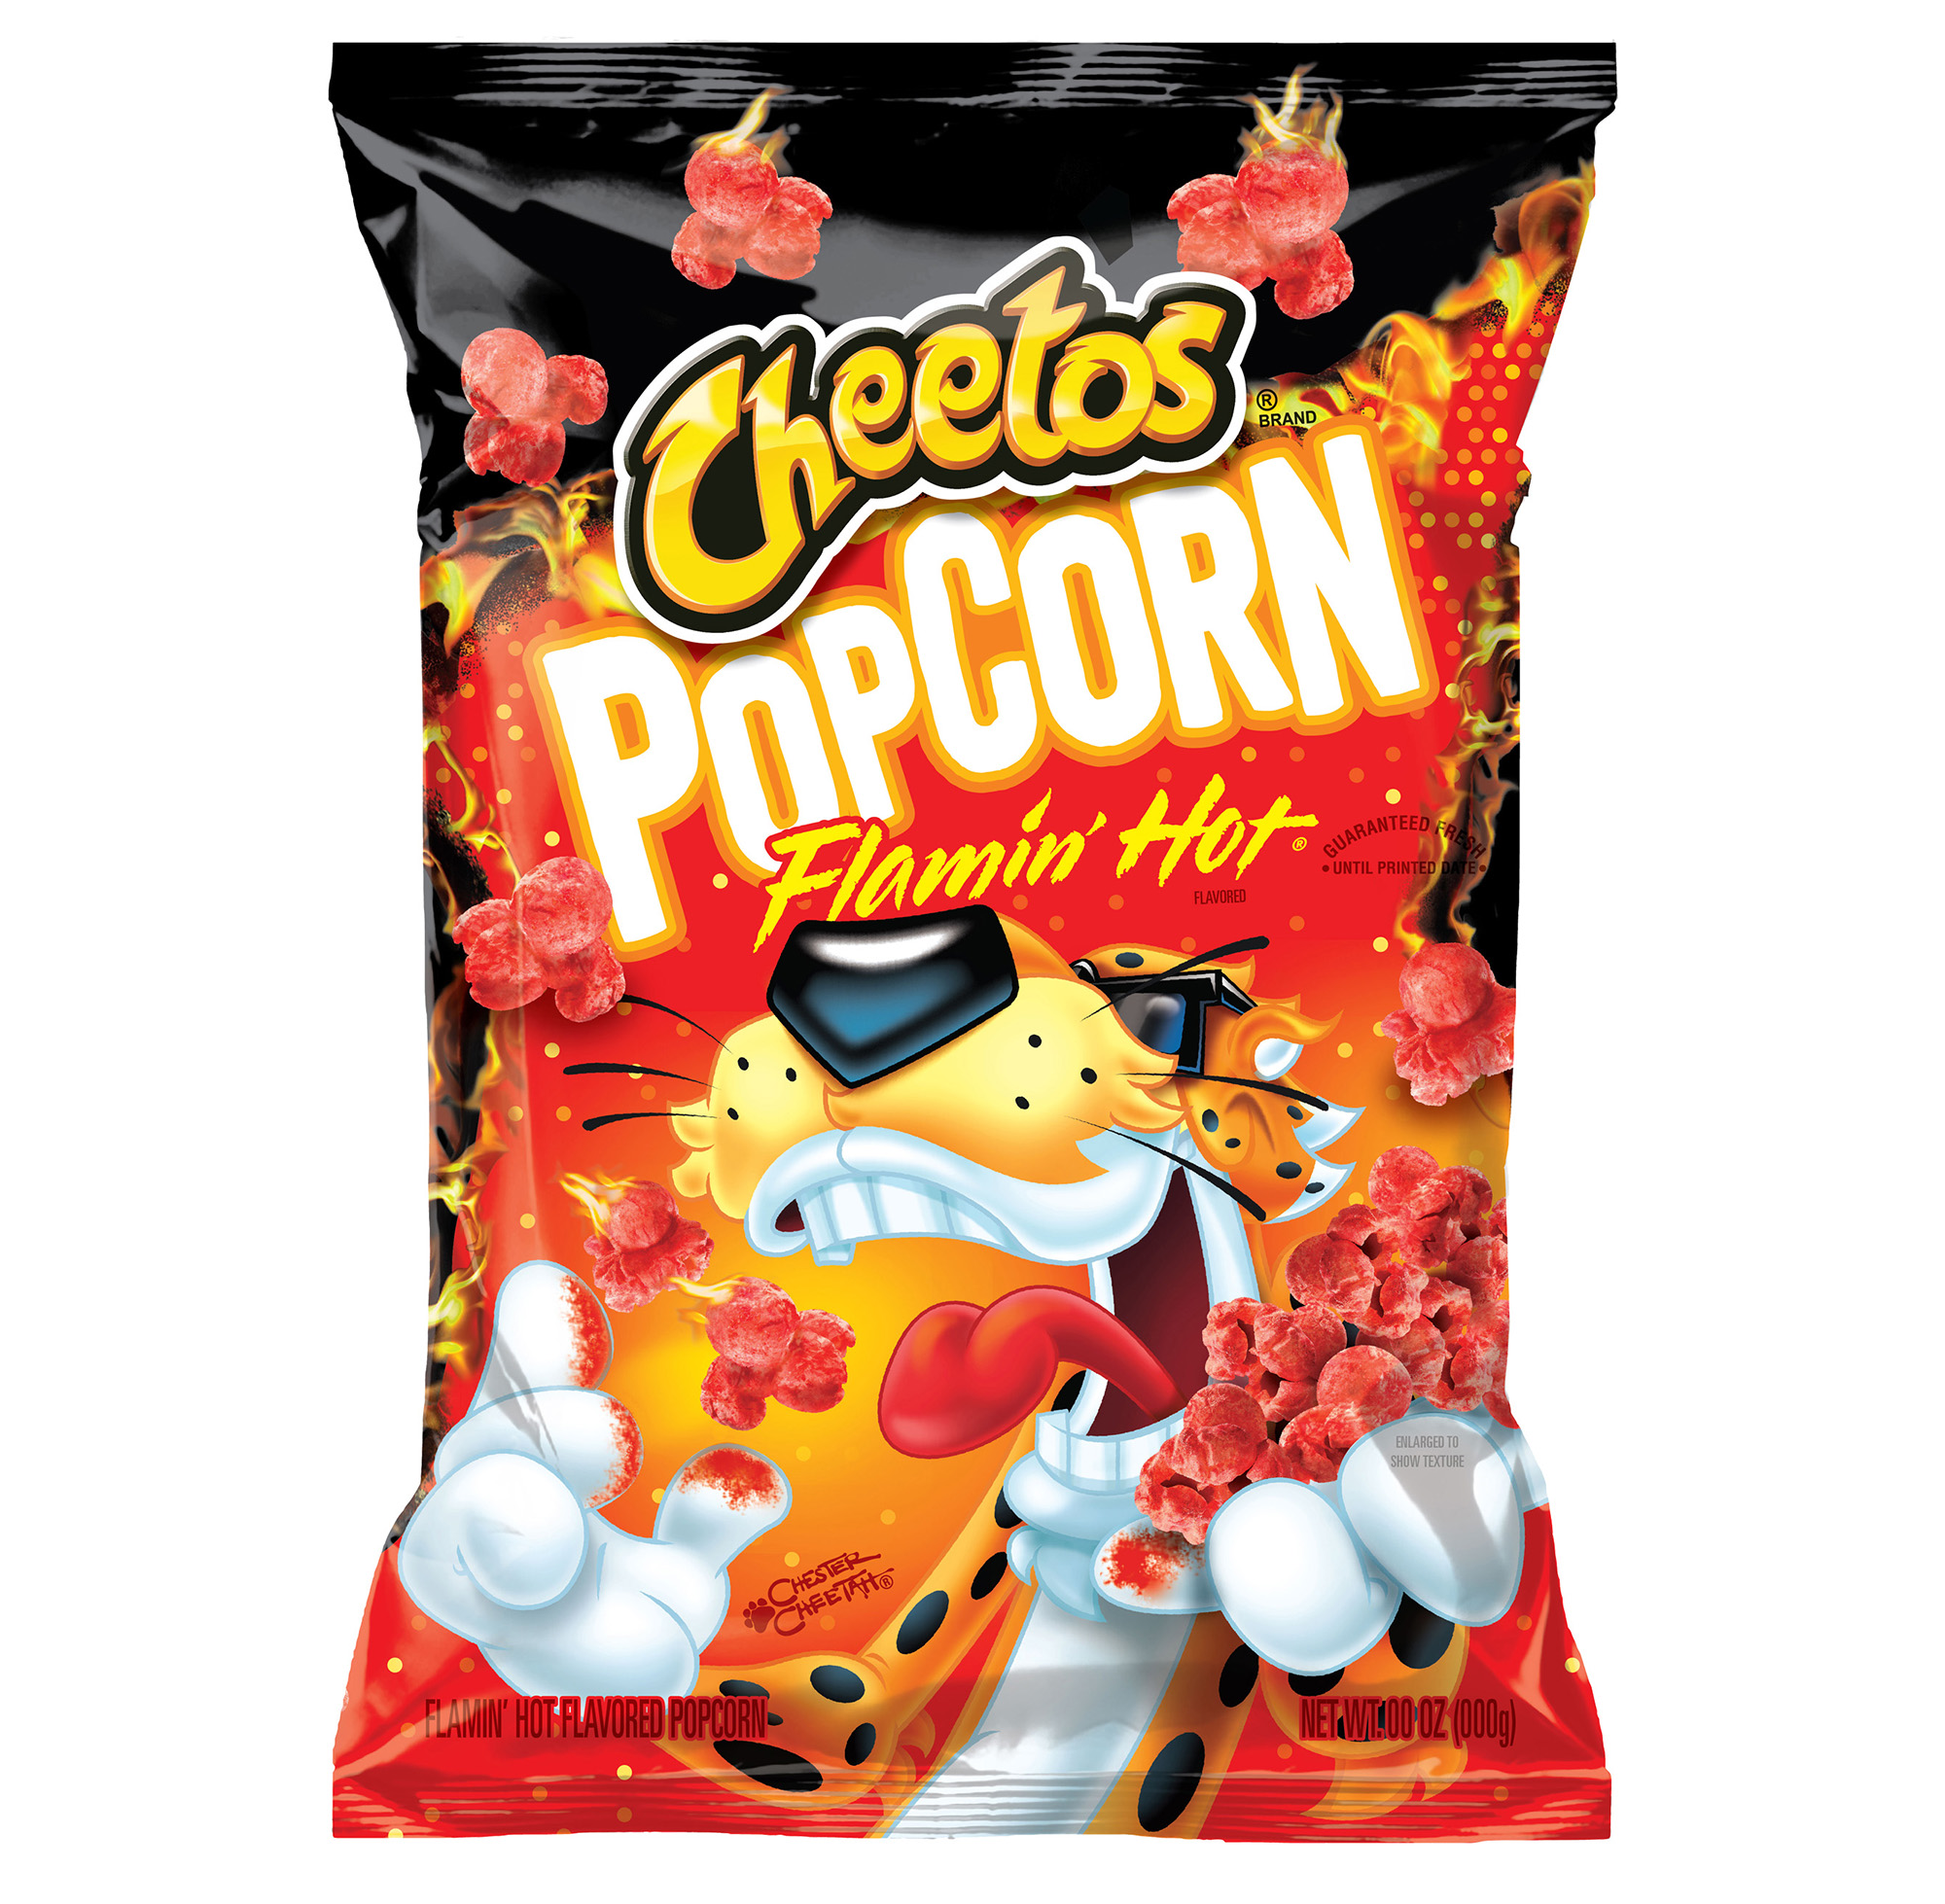 It's A Cheetos Thing